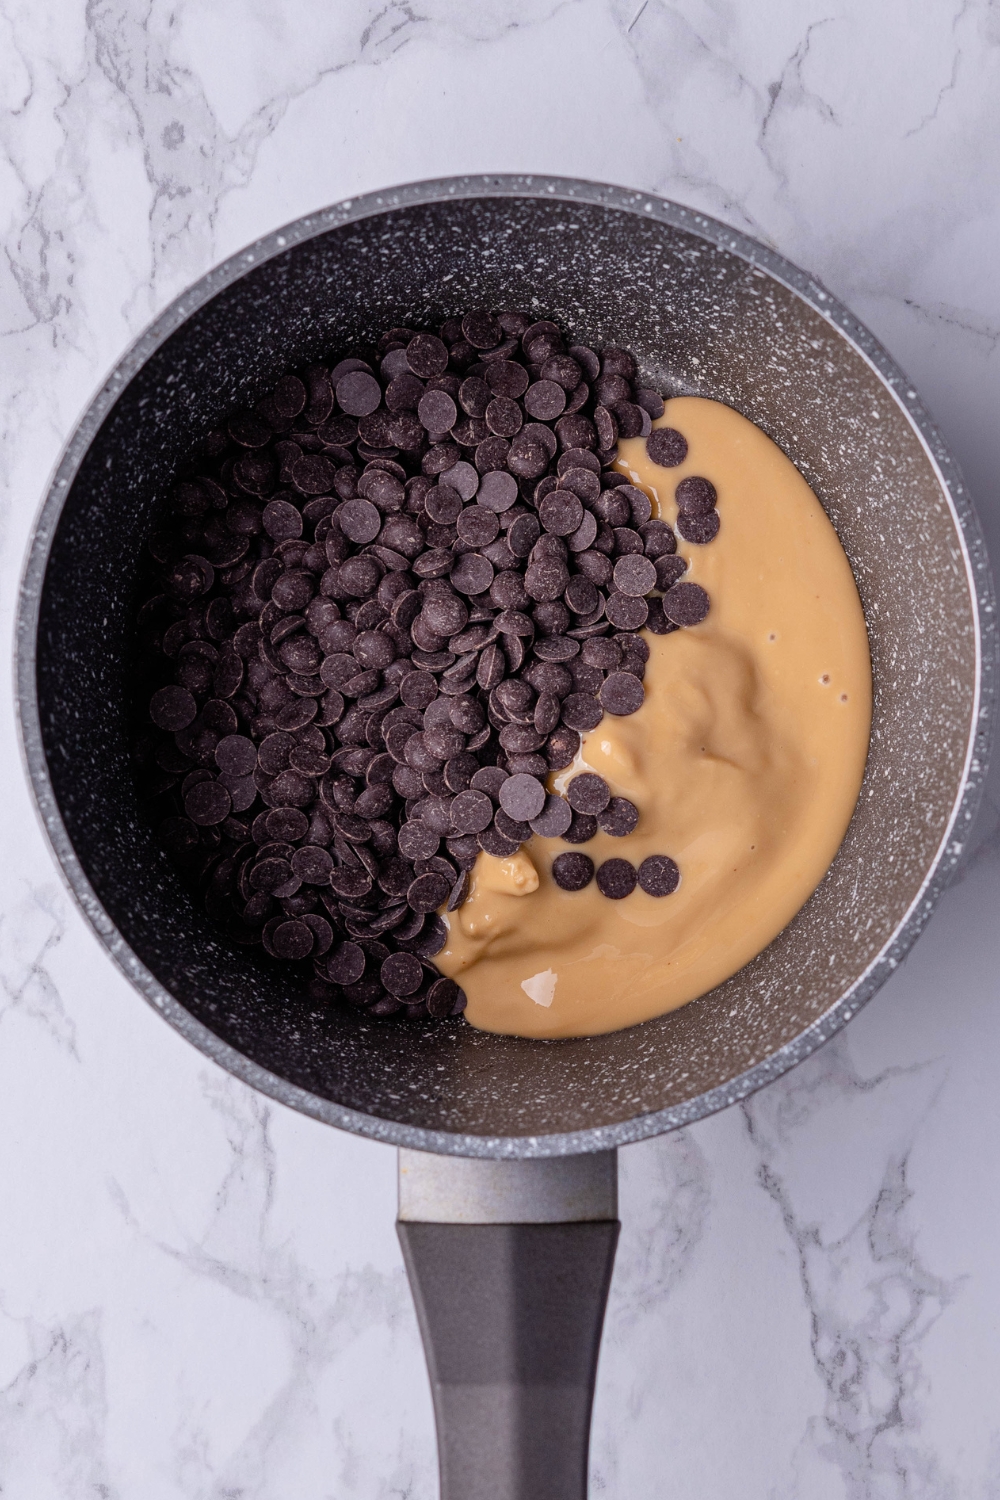 A sauce pot with peanut butter and chocolate chips in it.